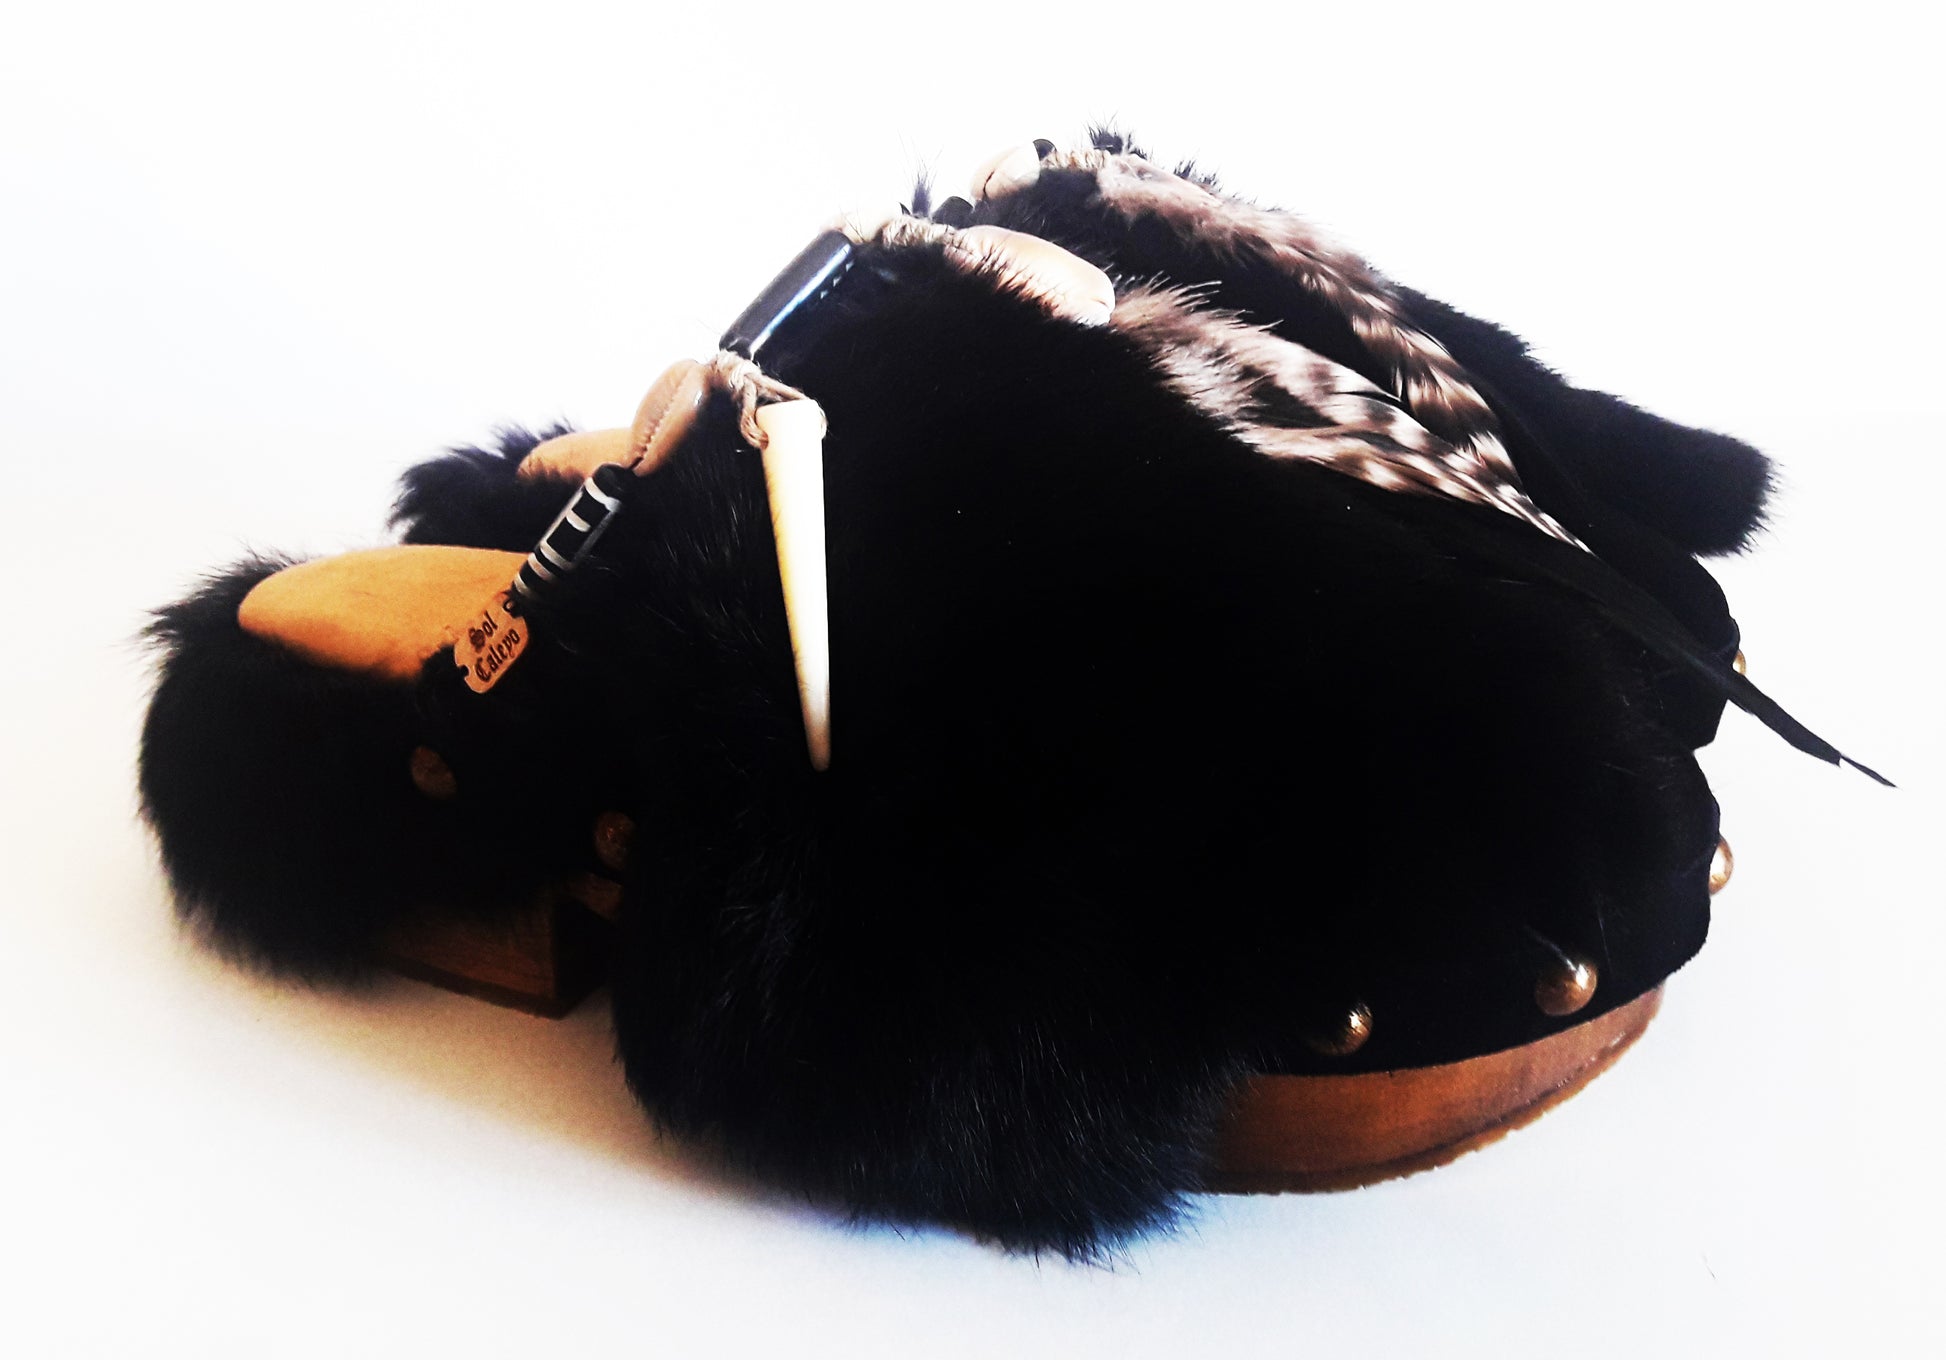 Leather clog with rabbit fur. Clogs with rabbit fur decorated with feathers, shells and horns with a unique Bohemian style. Boho style fur clogs. Sizes 34 to 47. High quality handmade leather shoes by sol Caleyo. Sustainable fashion.